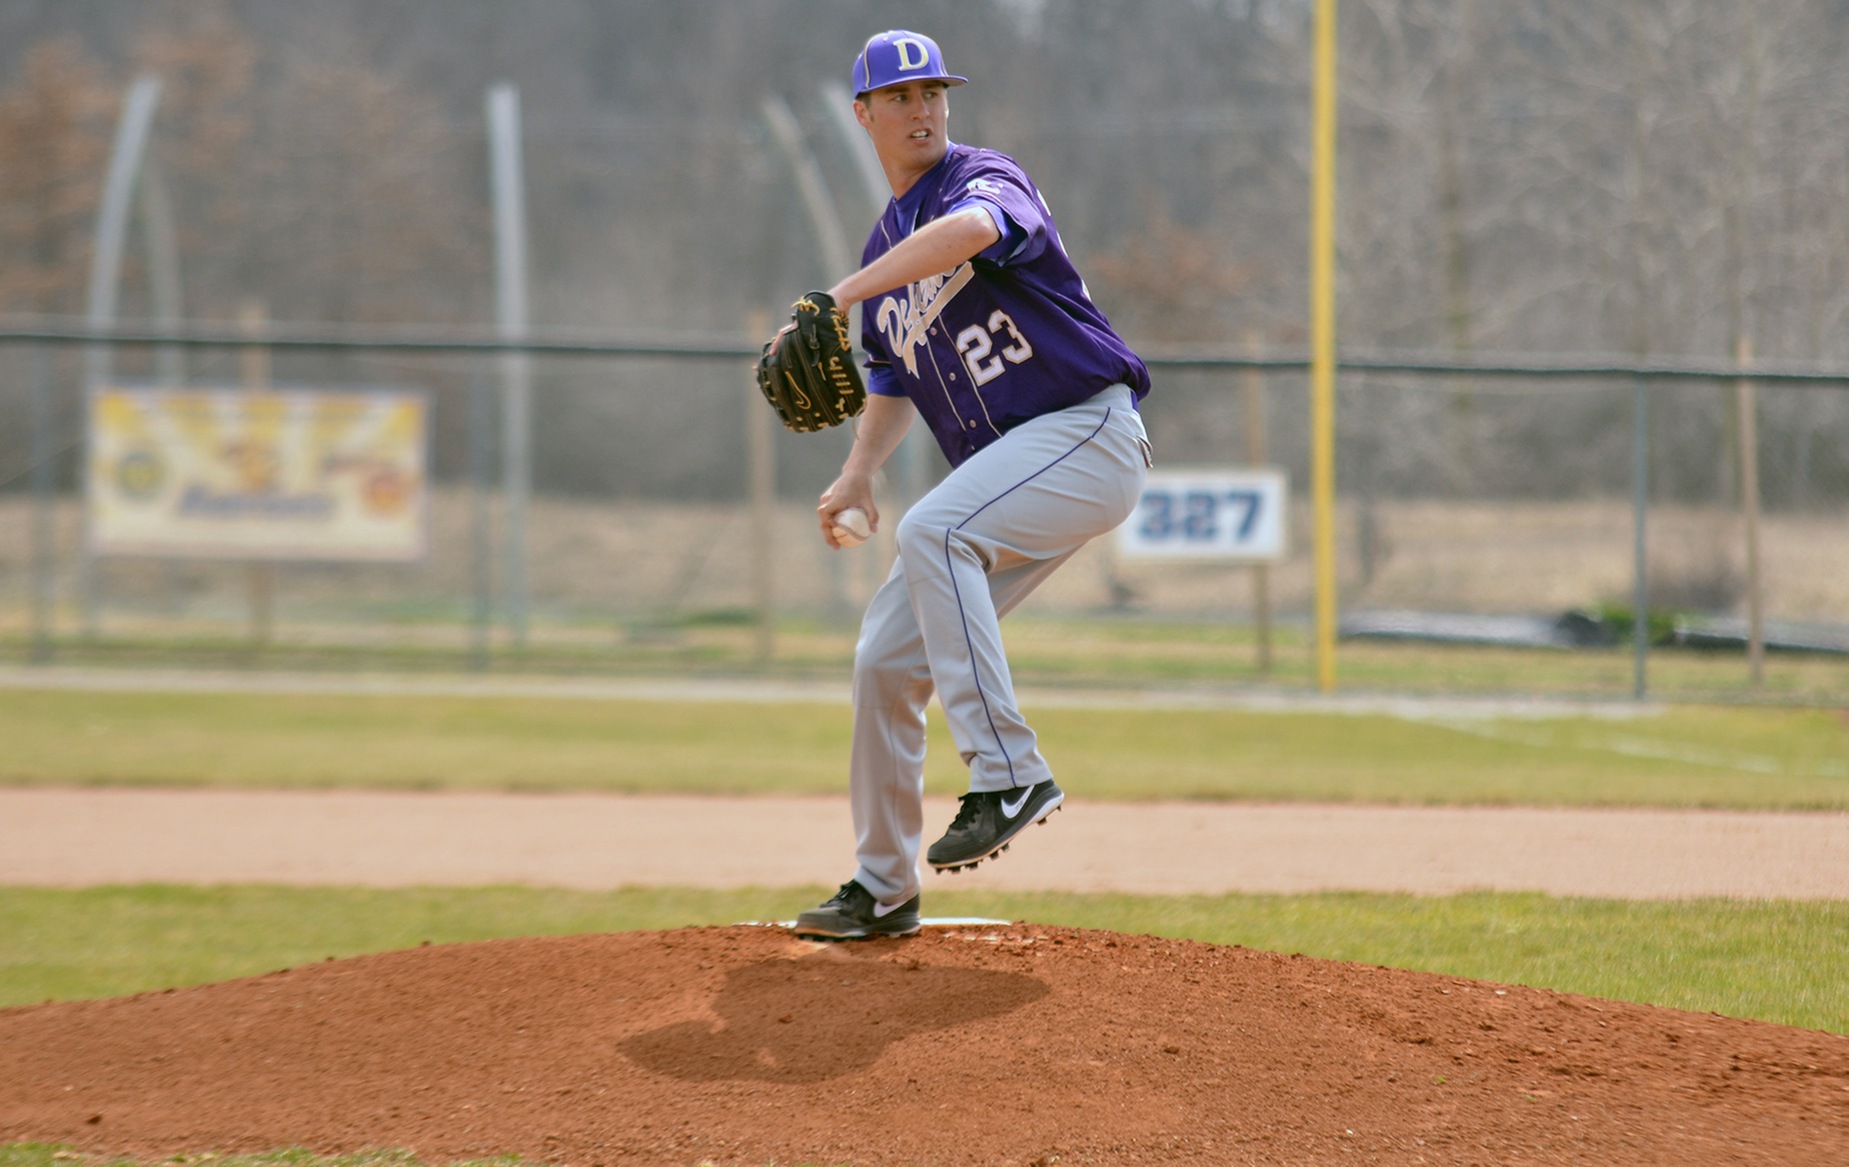 DC Pitchers Shut Down the Lions in Sweep of Doubleheader